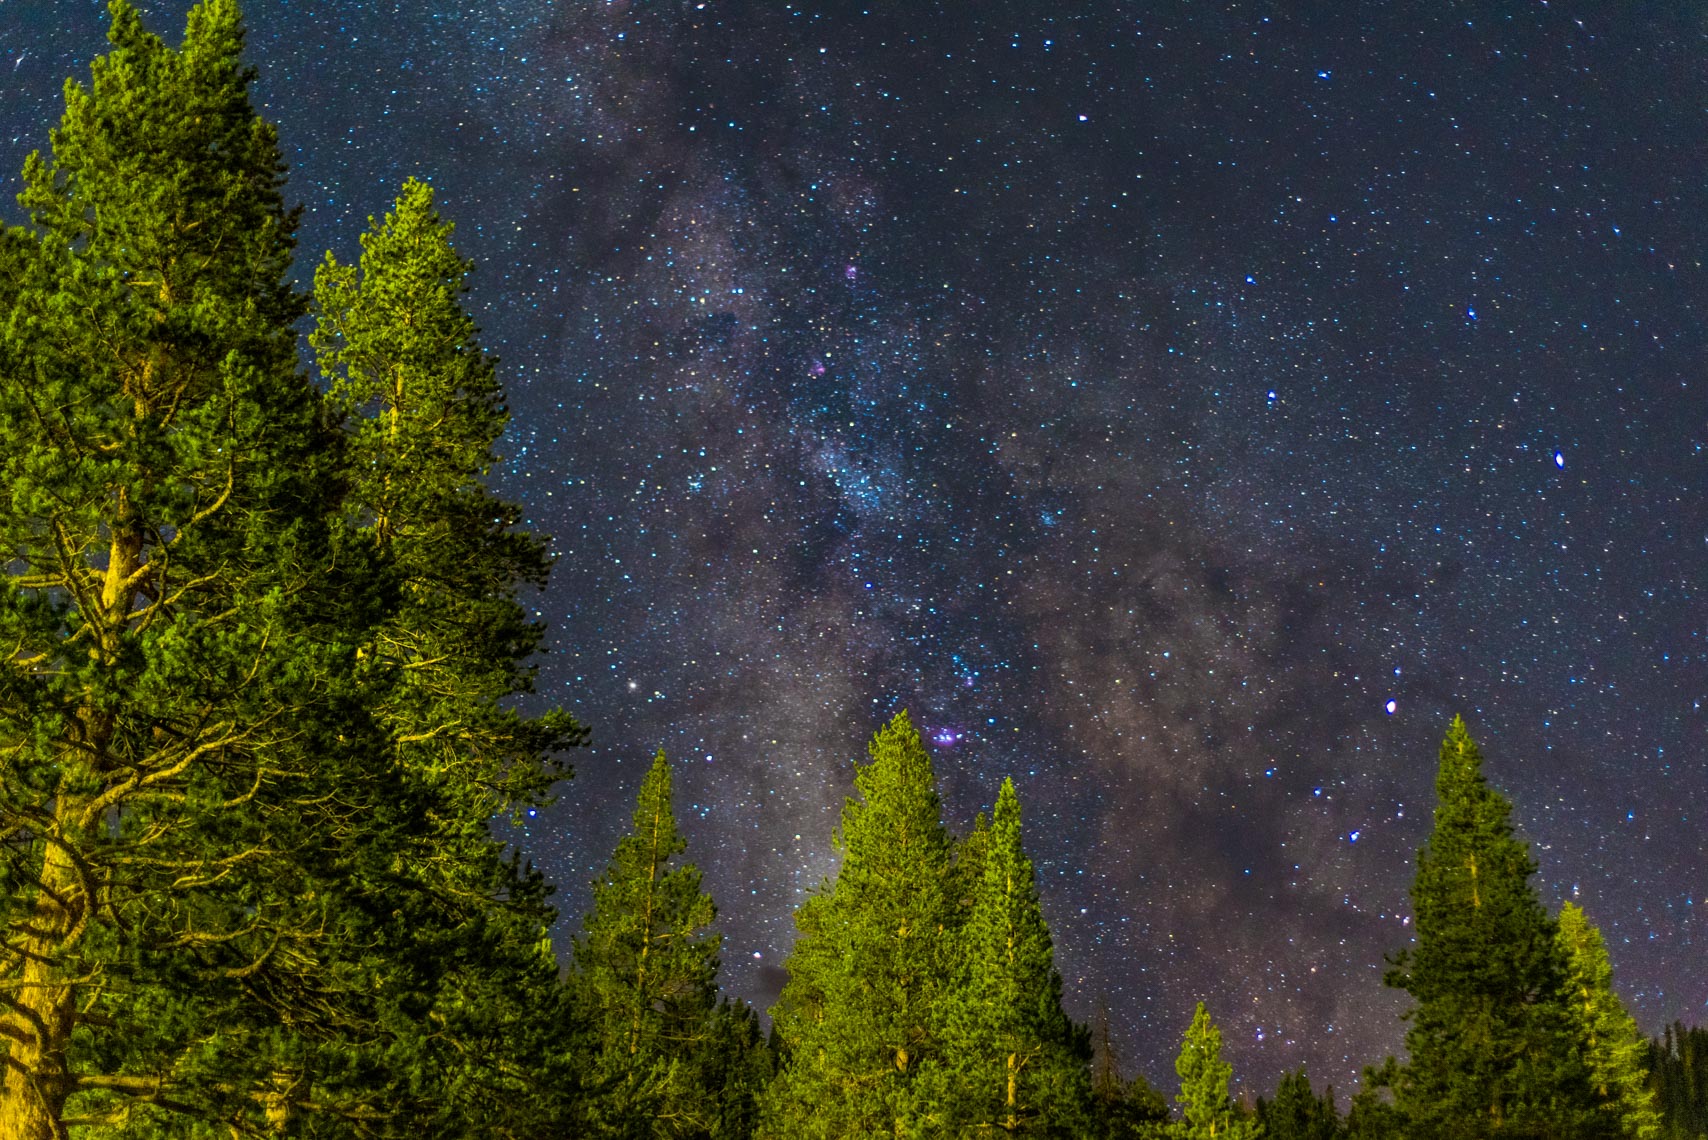 Landscape Photography, Squaw Valley, California, Nightscape, Milky Way Galaxy